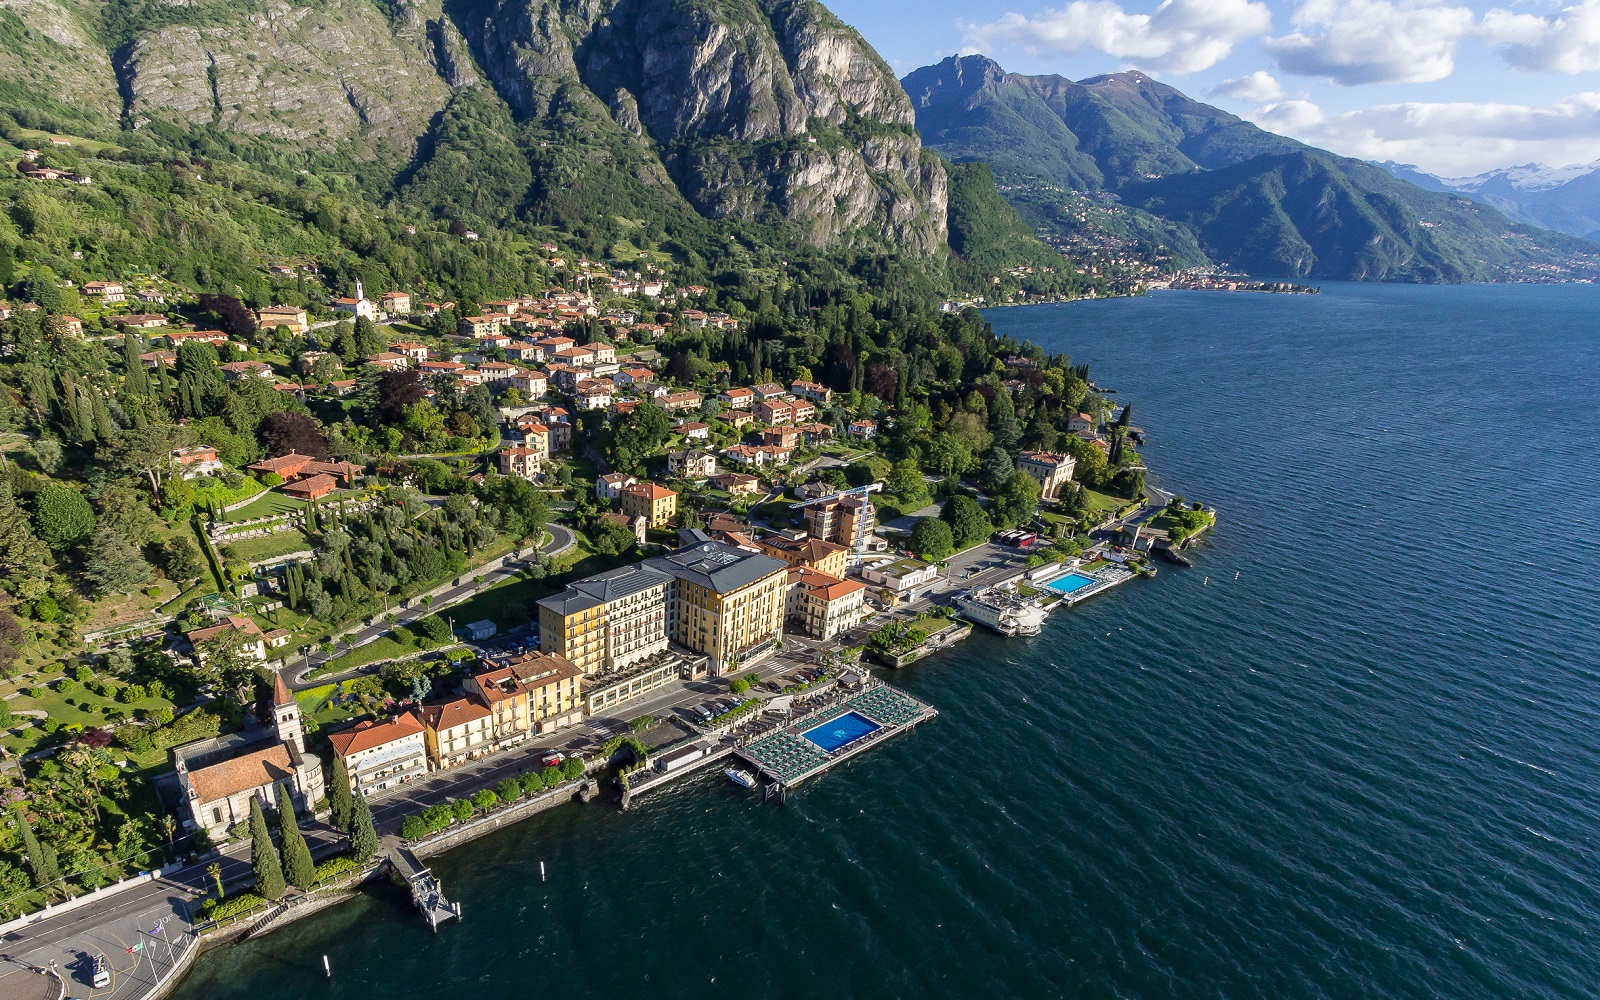 Marriott International Signs Agreement with Bain Capital Credit and Omnam Group to Bring EDITION Hotels Brand to Italy’s Lake Como